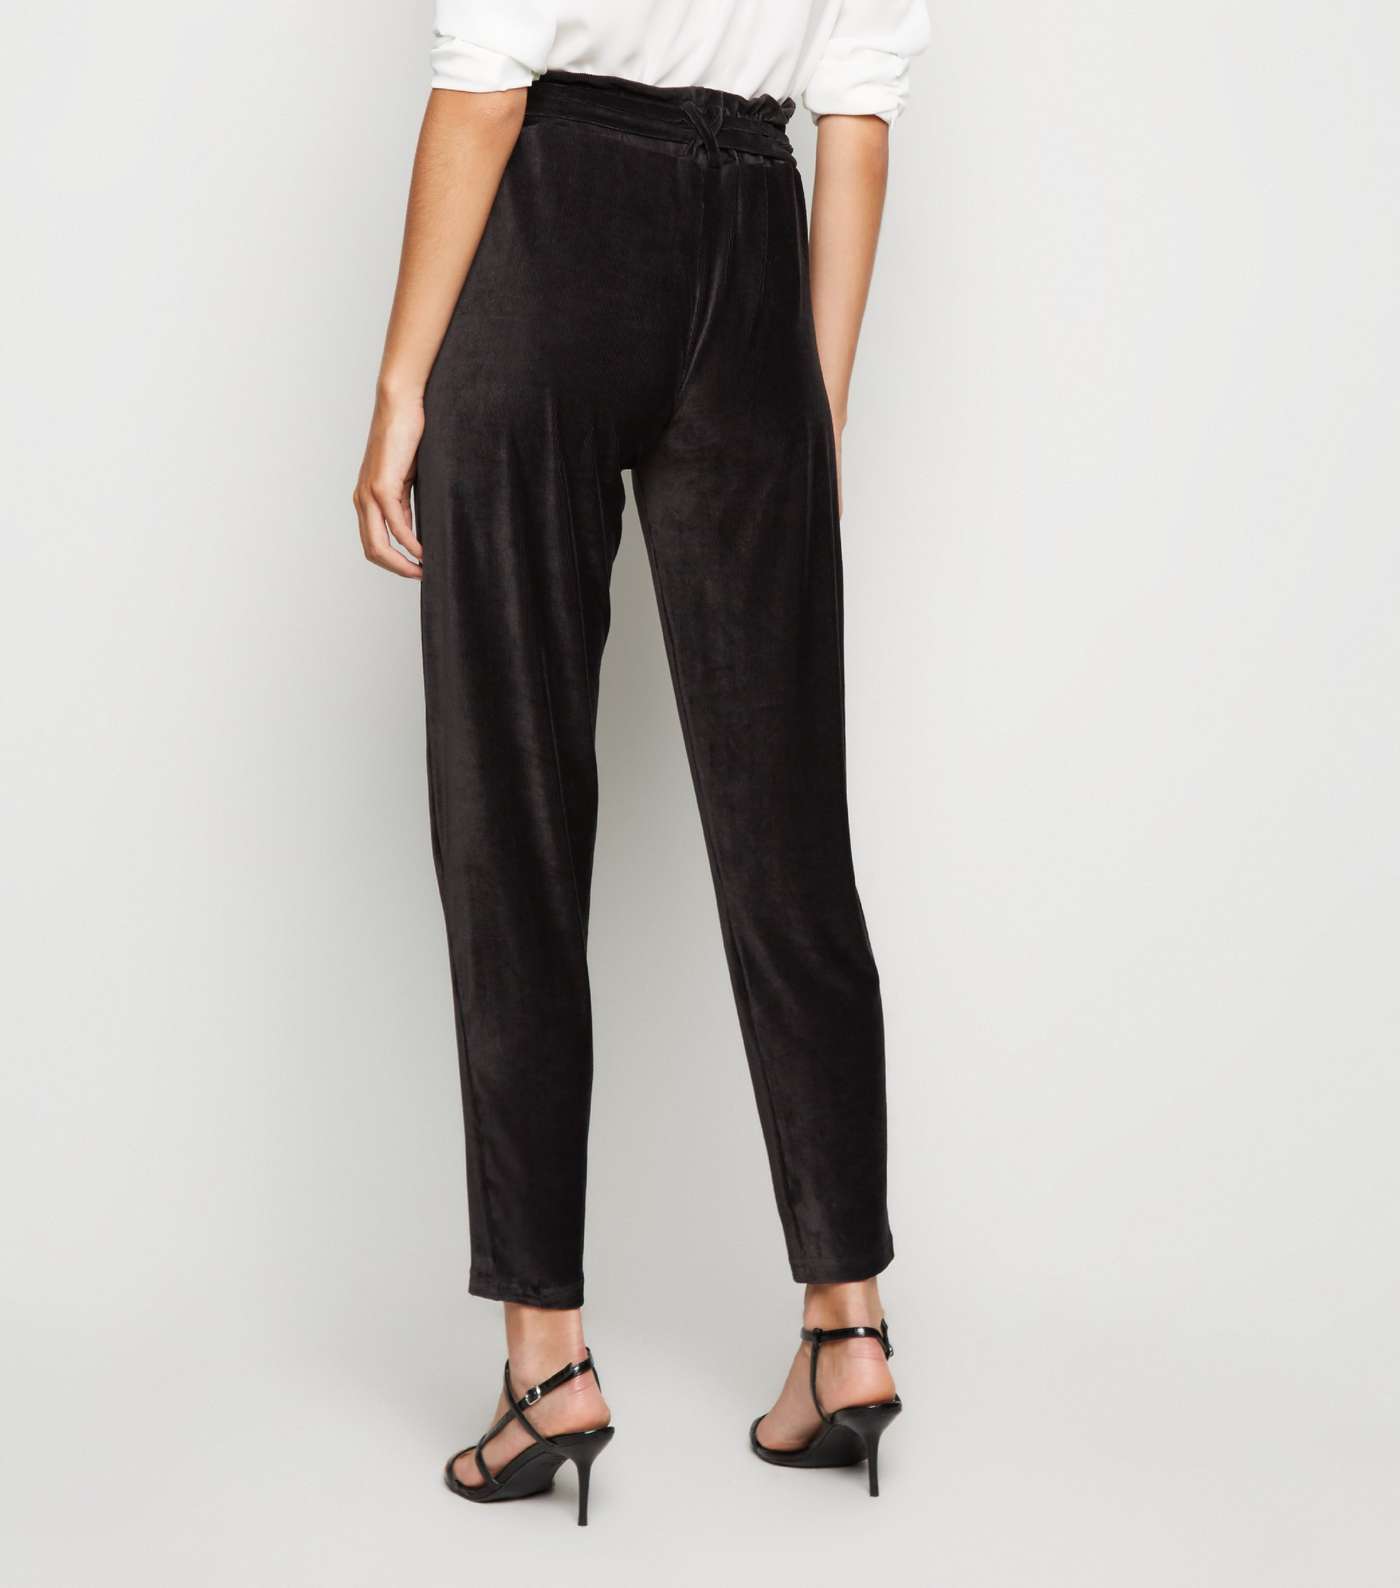 Blue Vanilla Black Corduroy Soft Touch Trousers Image 3